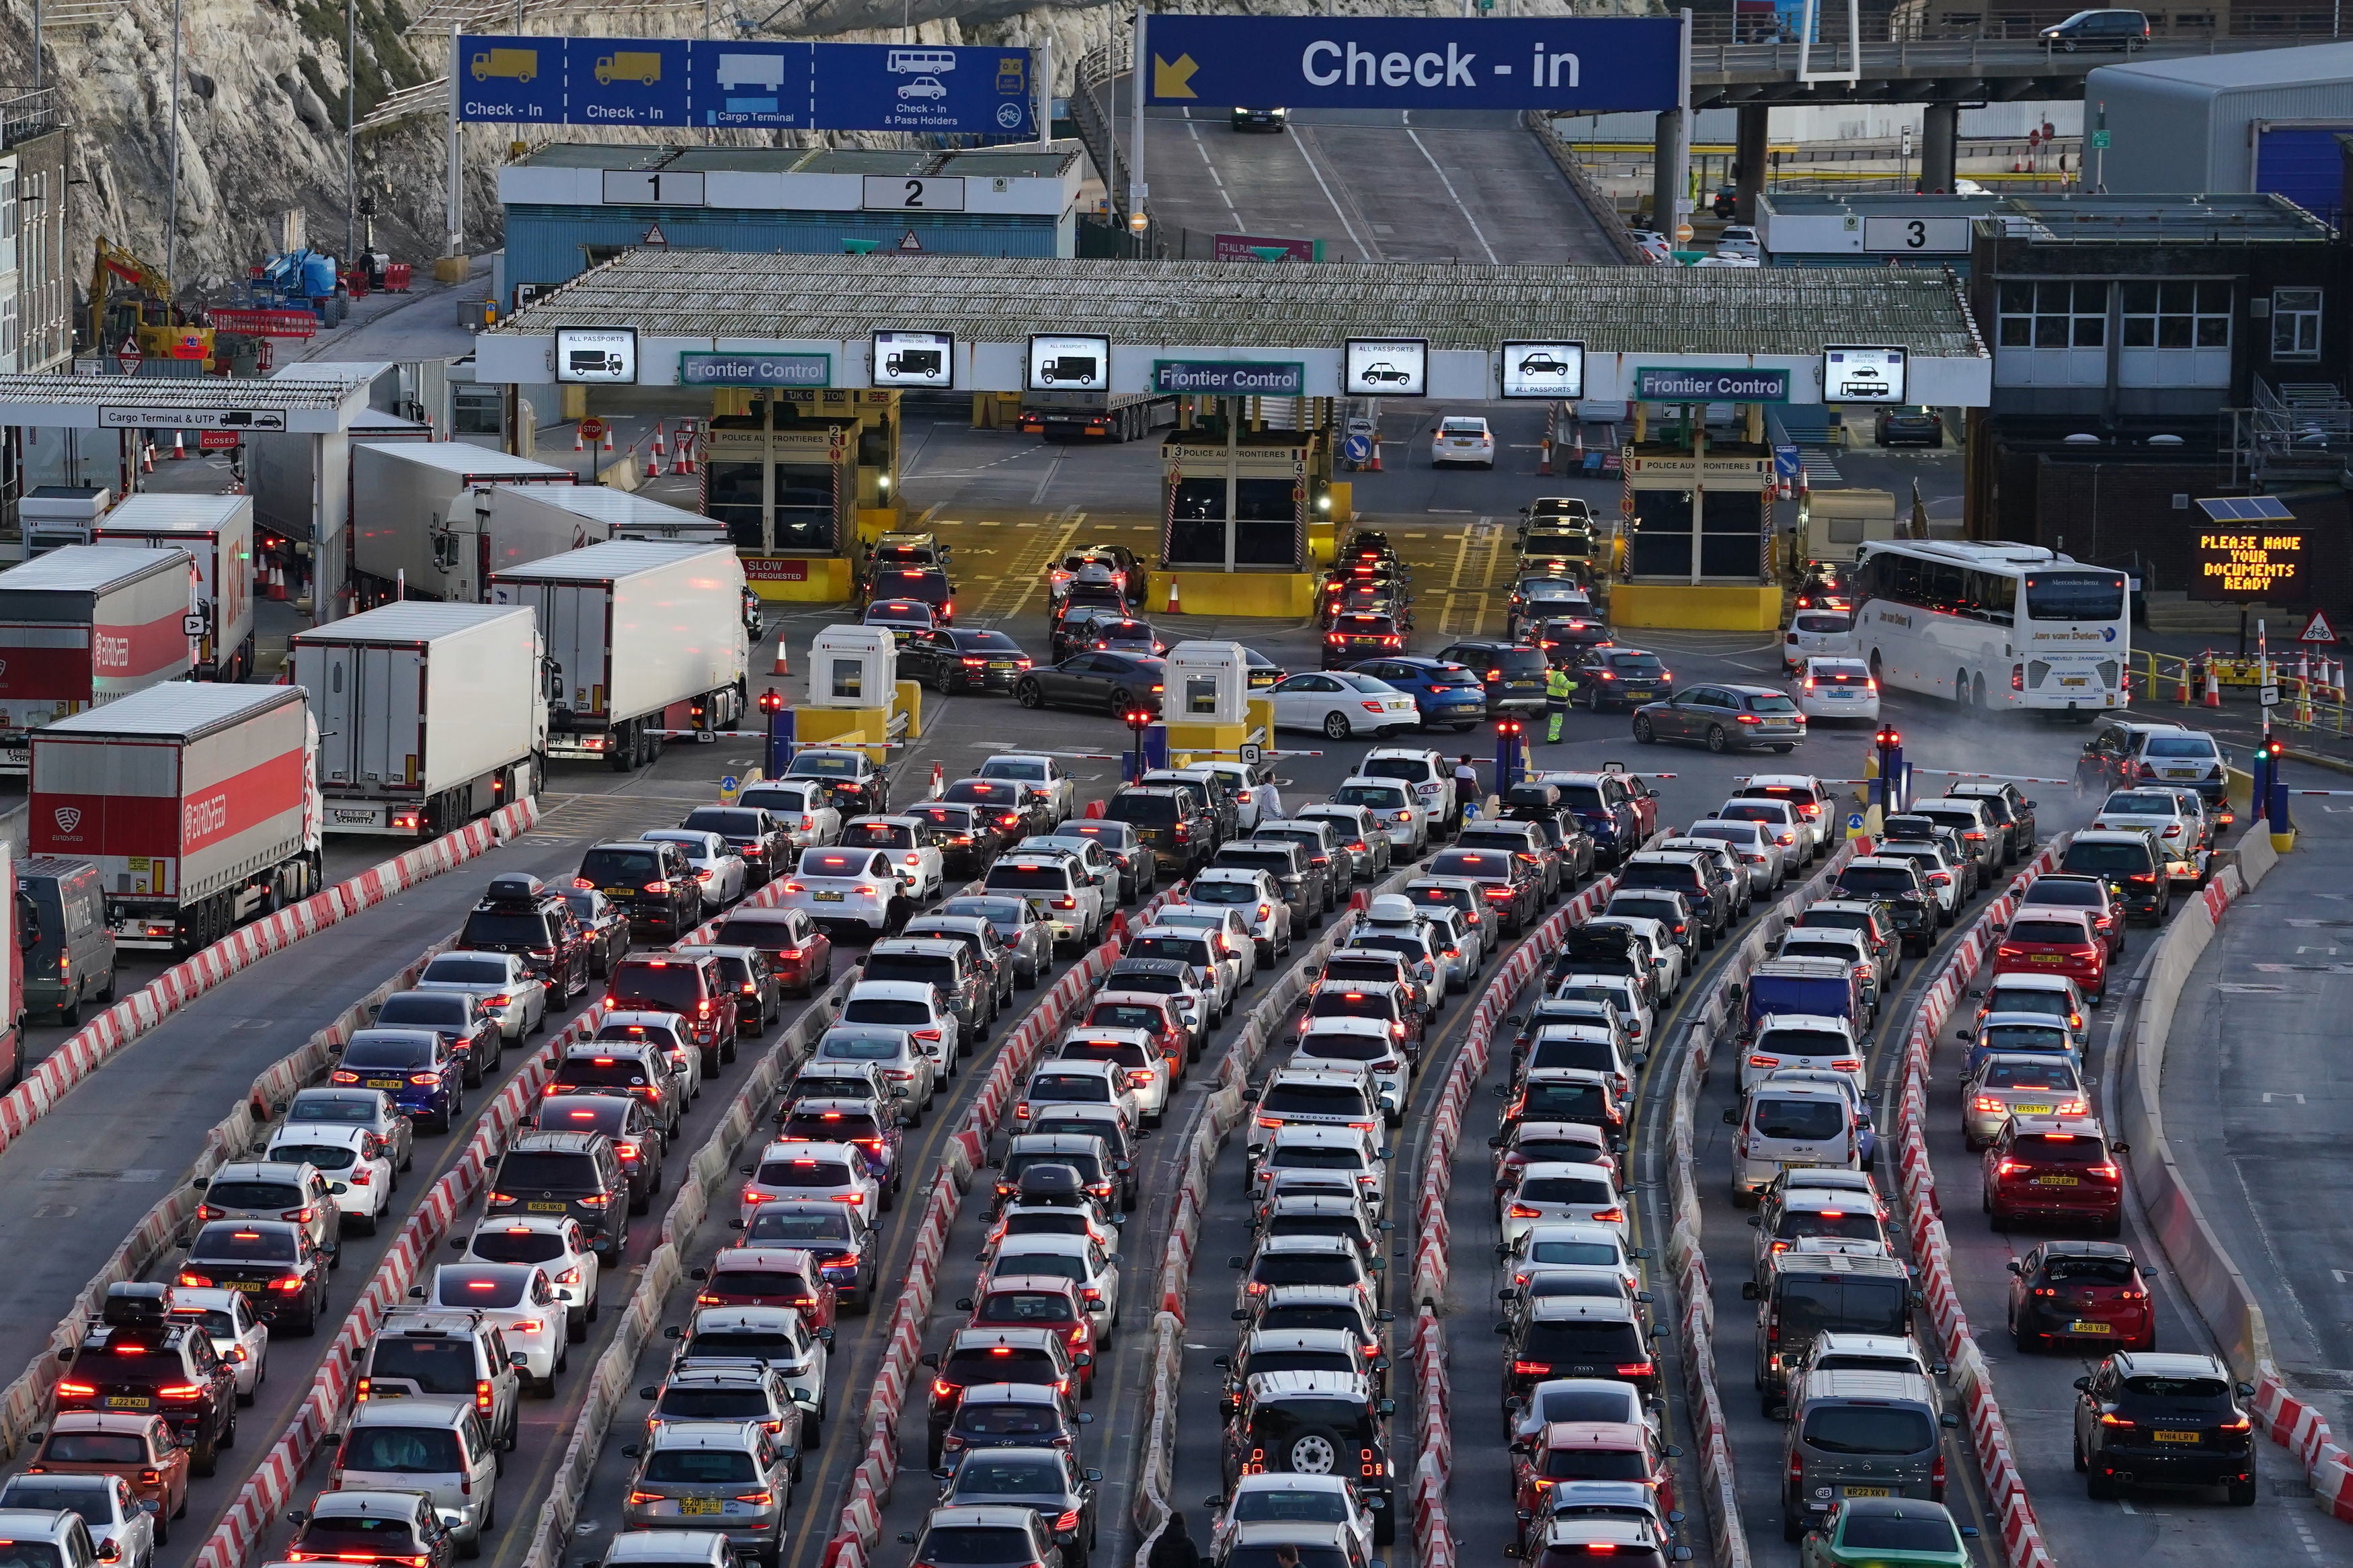 pDrivers queue for ferries at Dover, Kent, as people travel to destinations over the Christmas period/p